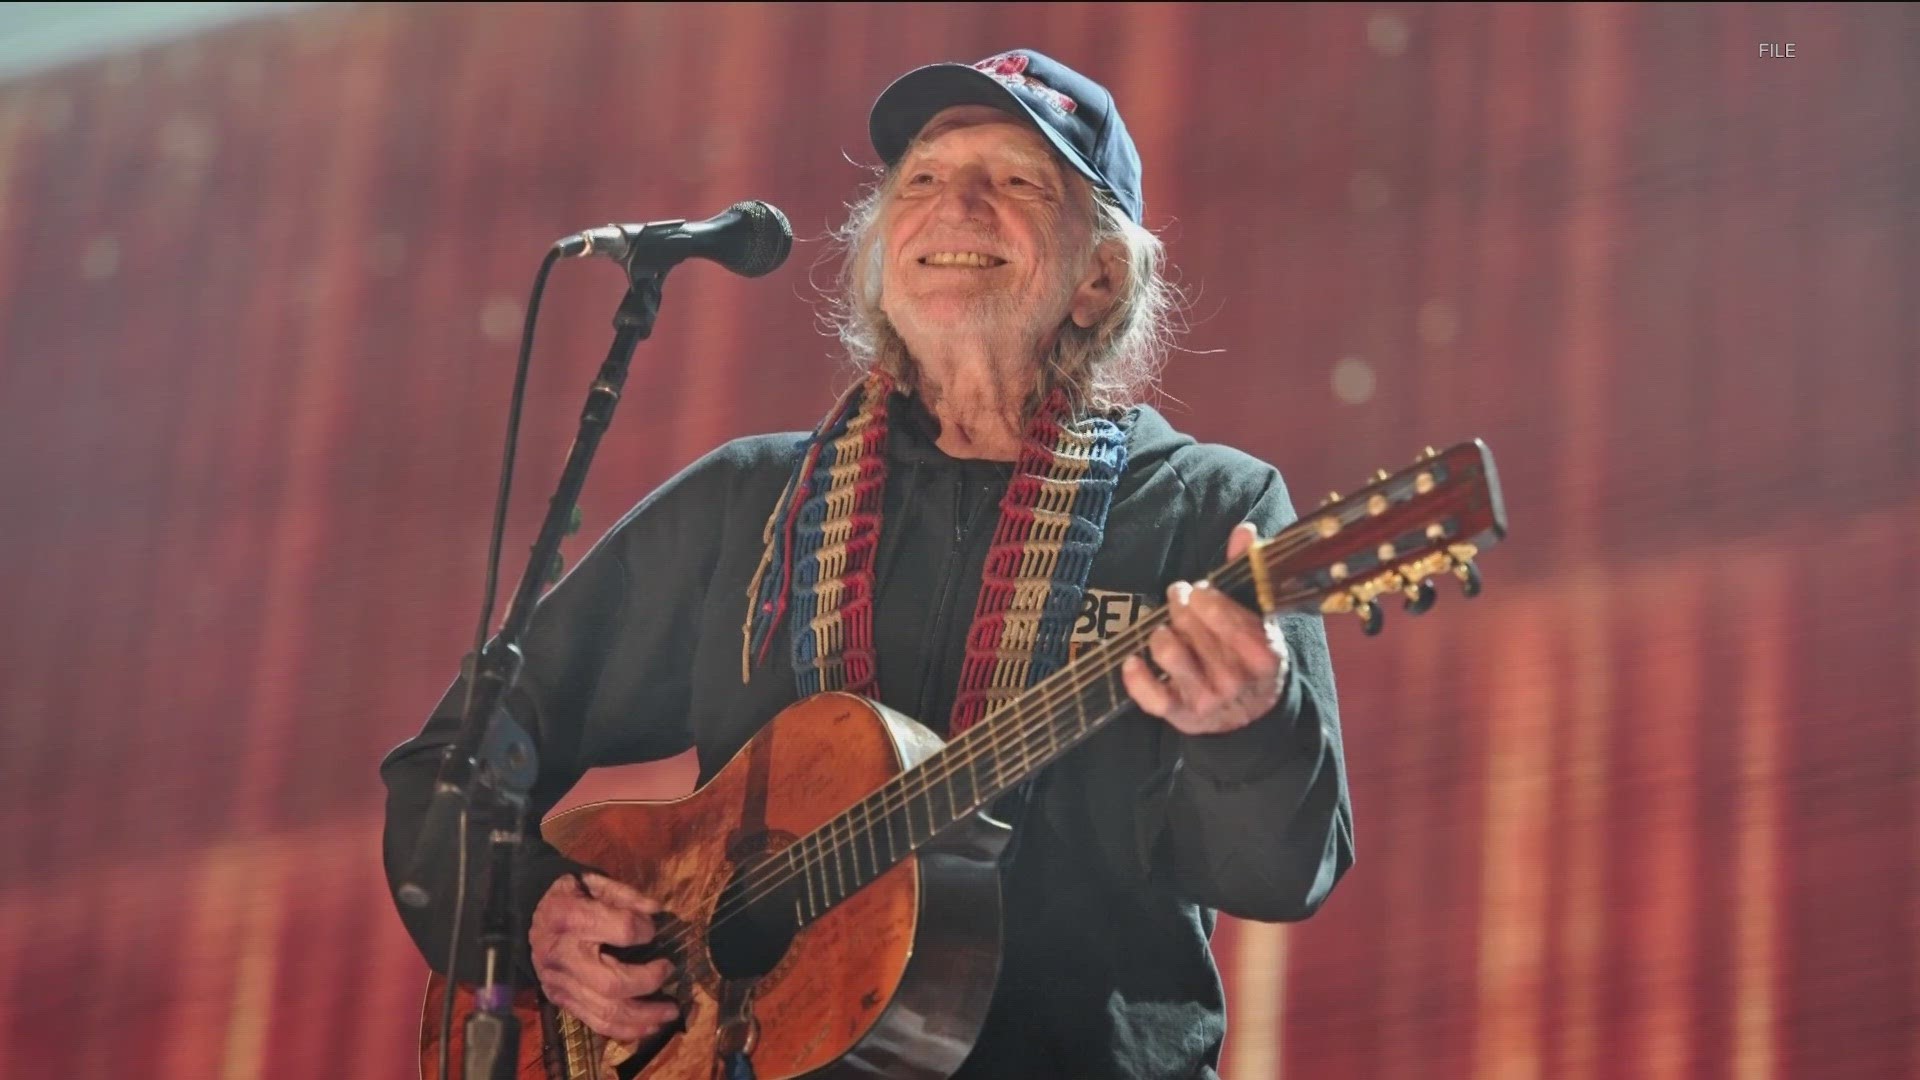 If you missed out on Willie Nelson's 90th birthday celebration, there's still a chance to see it!